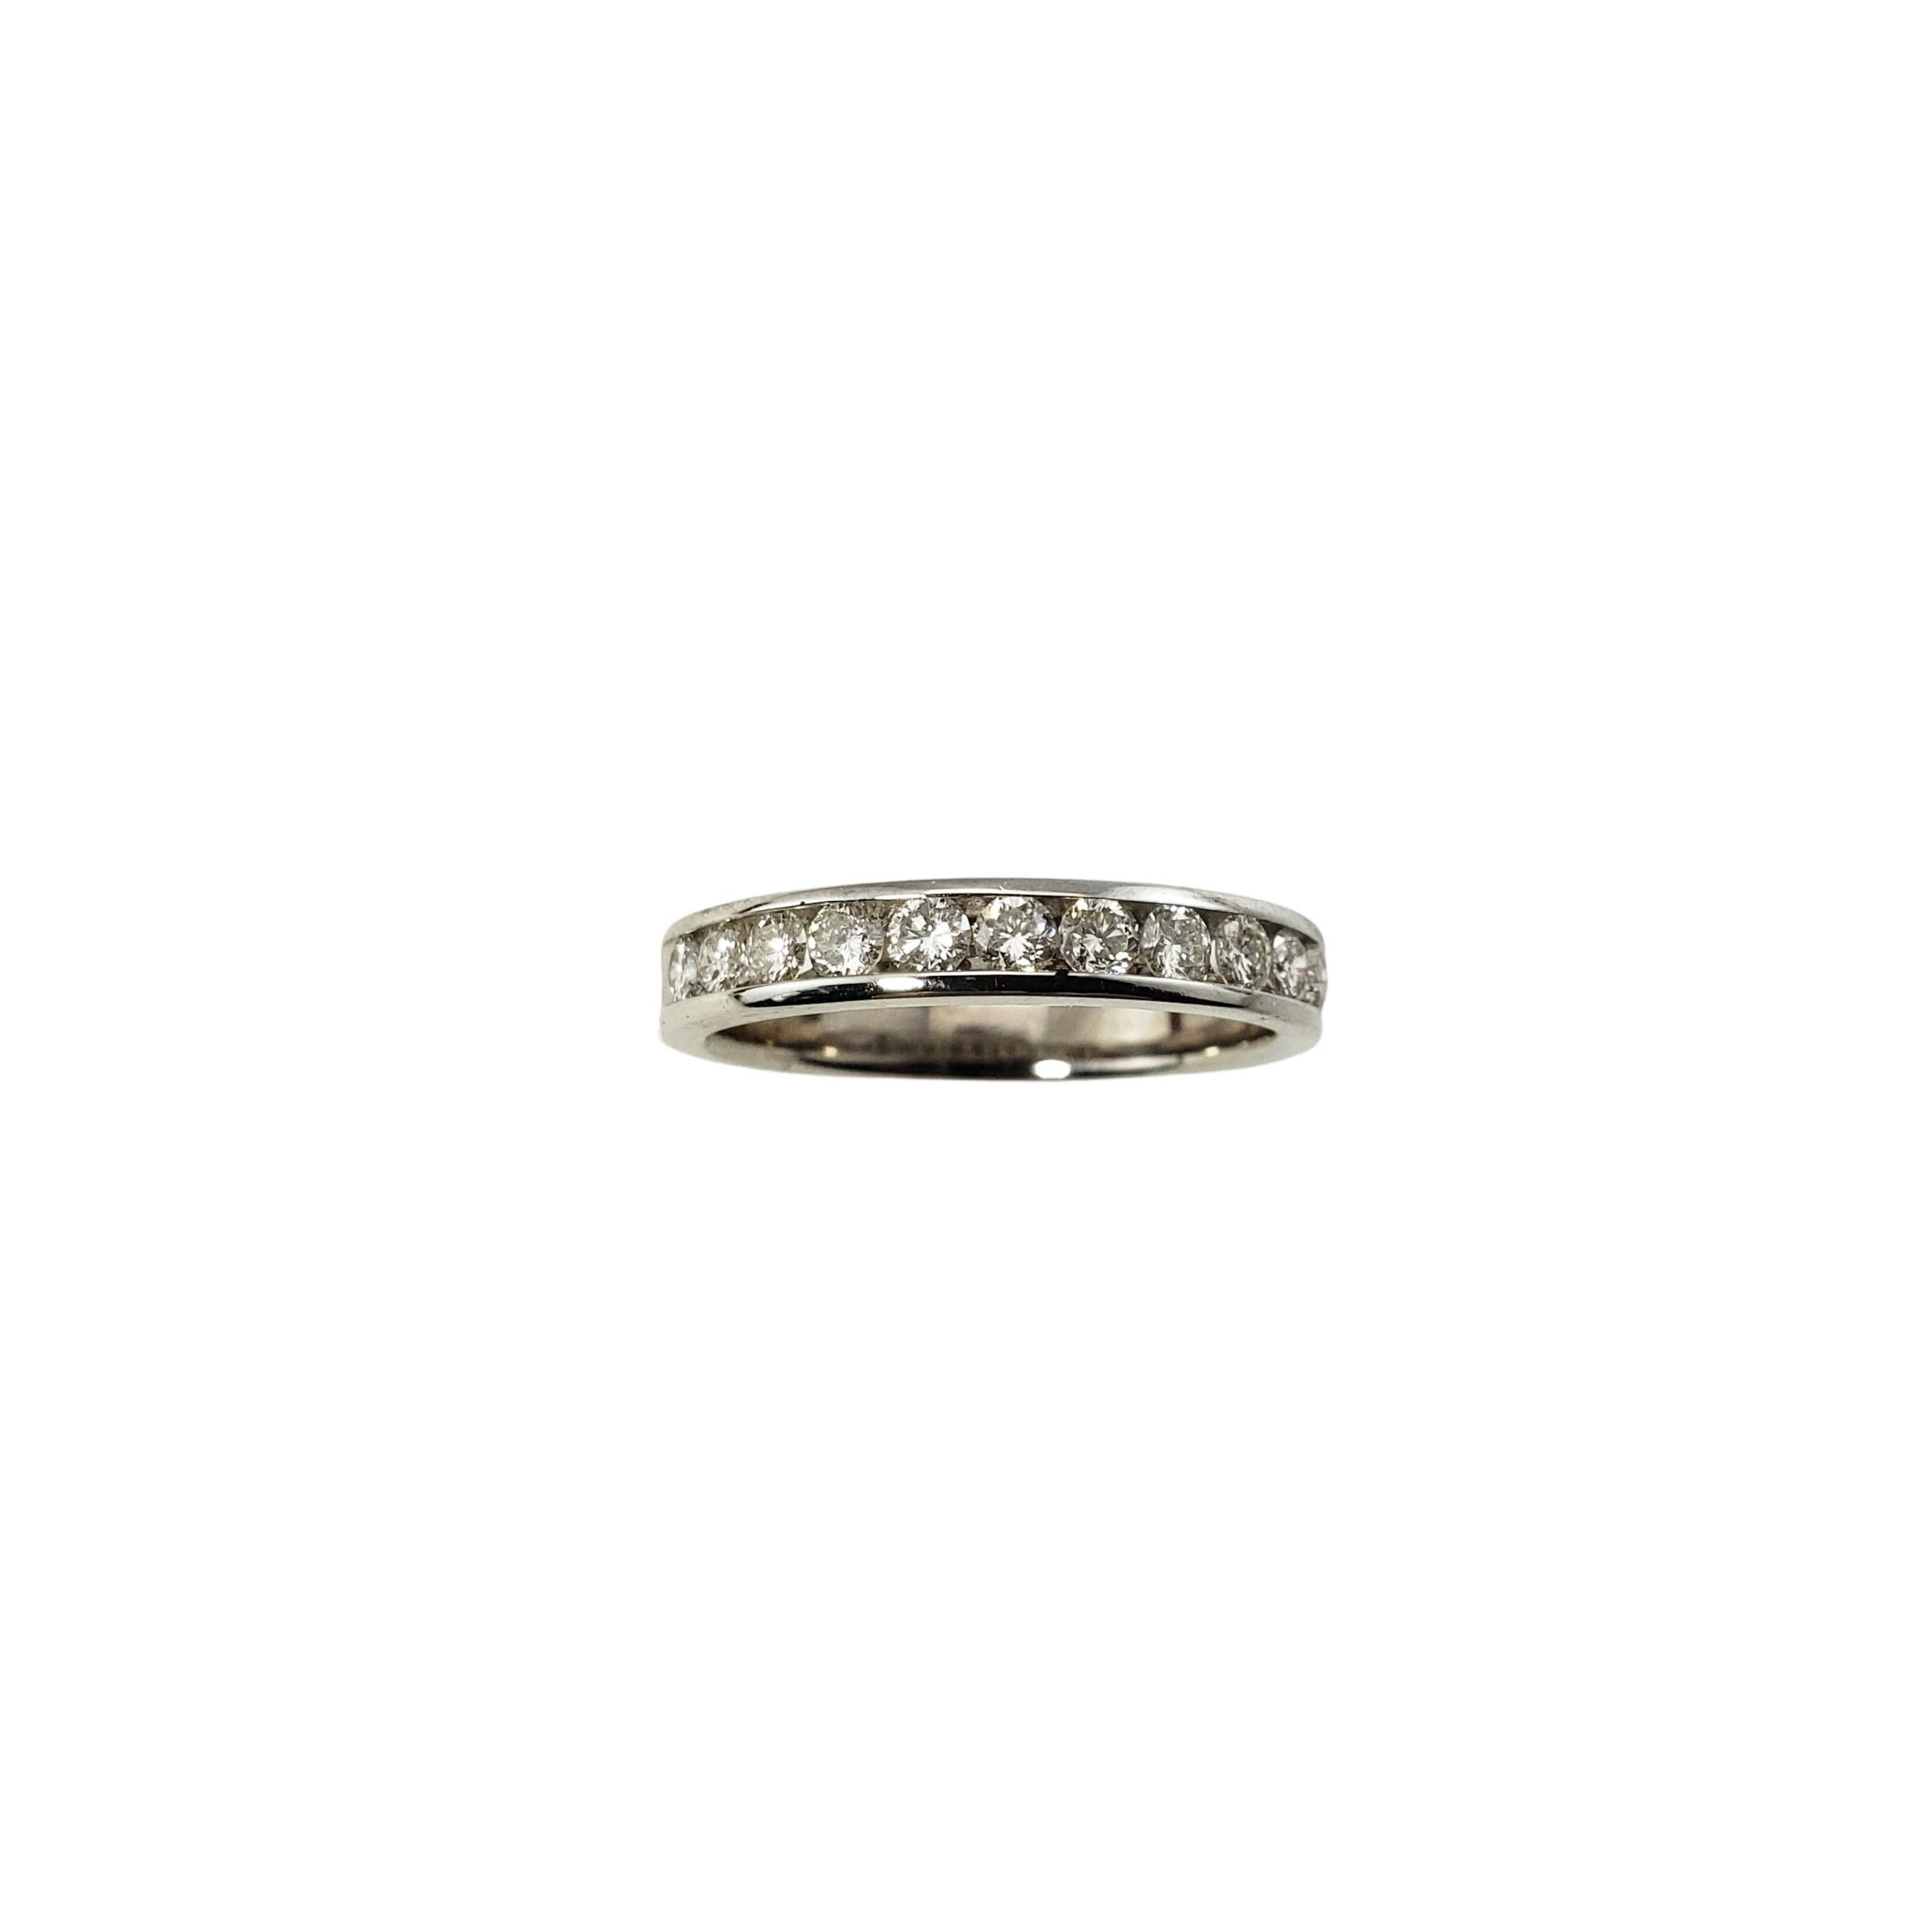 14 Karat White Gold and Diamond Wedding Band Ring Size 5.5-

This sparkling wedding band features 11 round brilliant cut diamonds set in classic 14K white gold.  Width:  3 mm.  Shank:  3 mm.

Approximate total diamond weight:  .44 ct.

Diamond